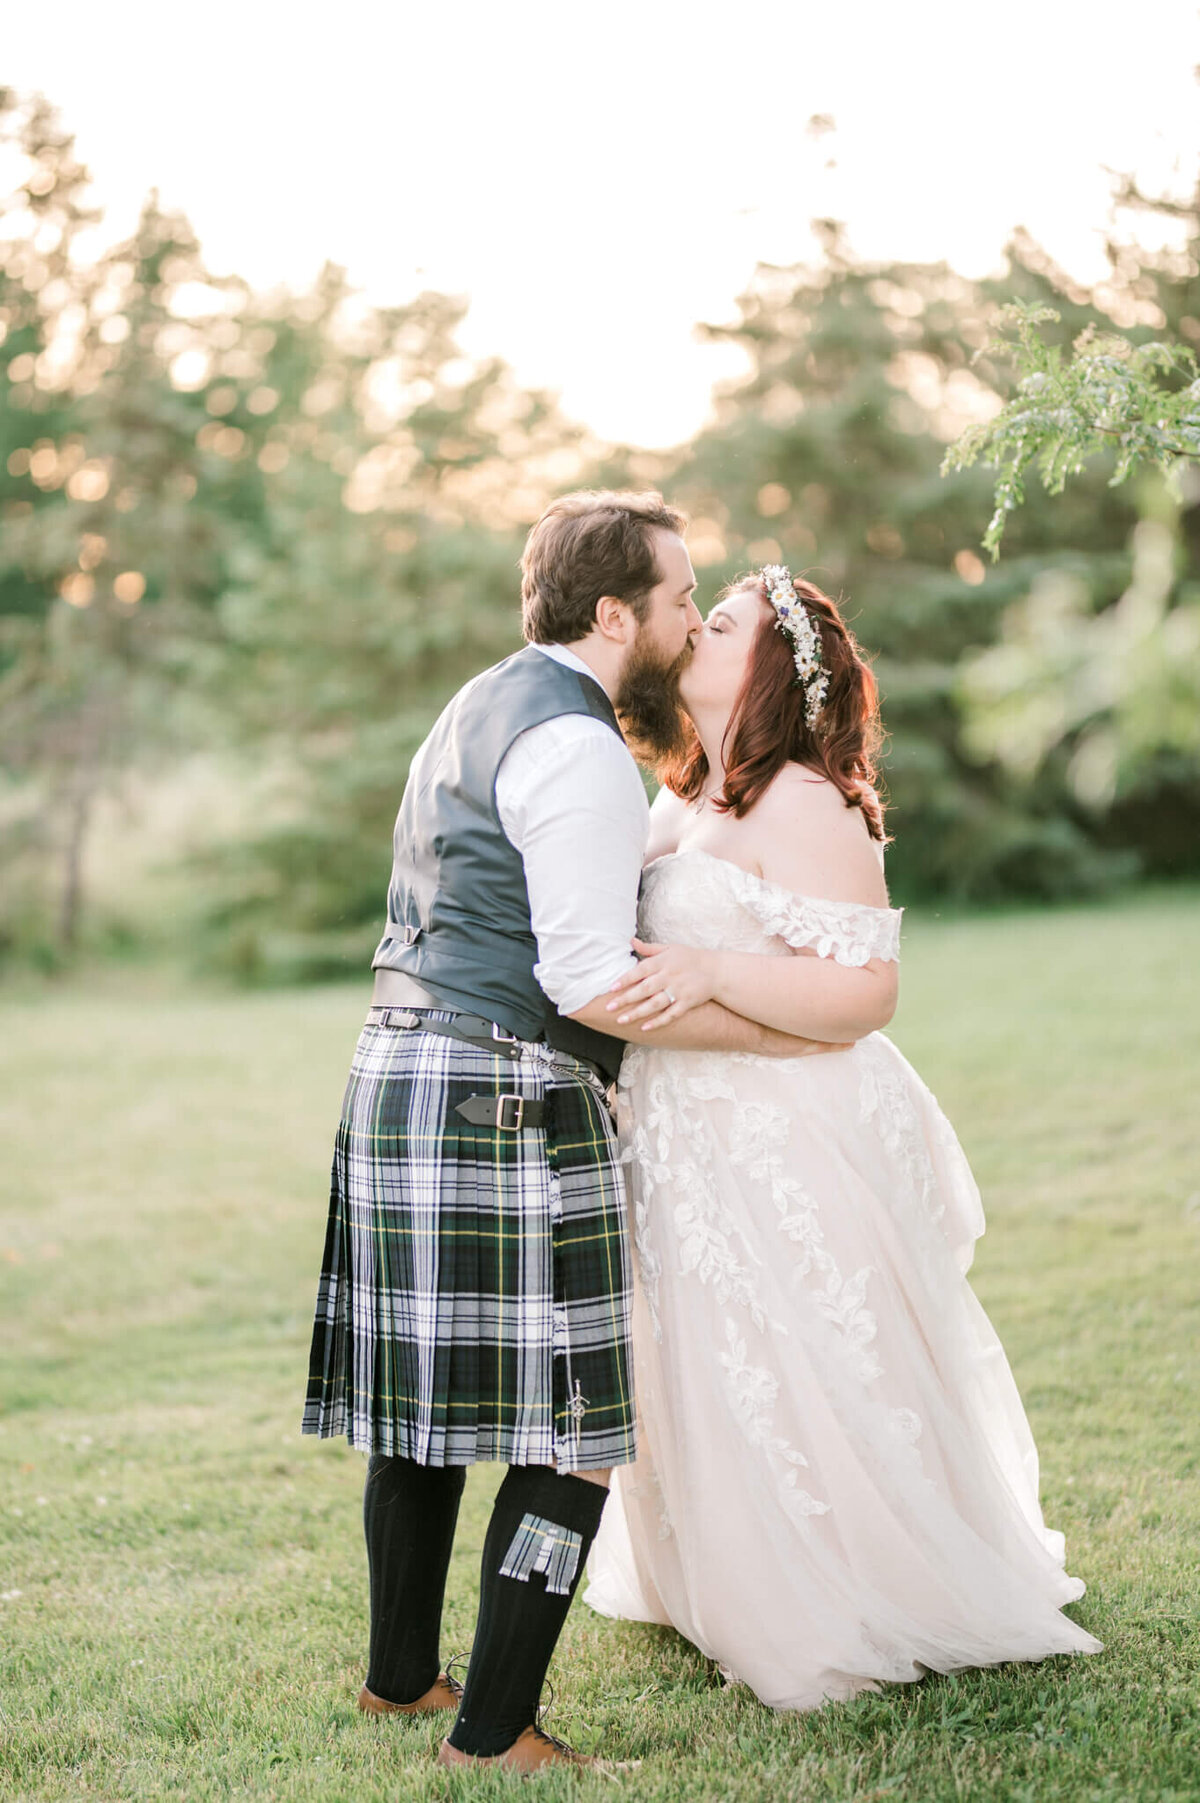 Bride and groom kissing with the groom wearing a kilt